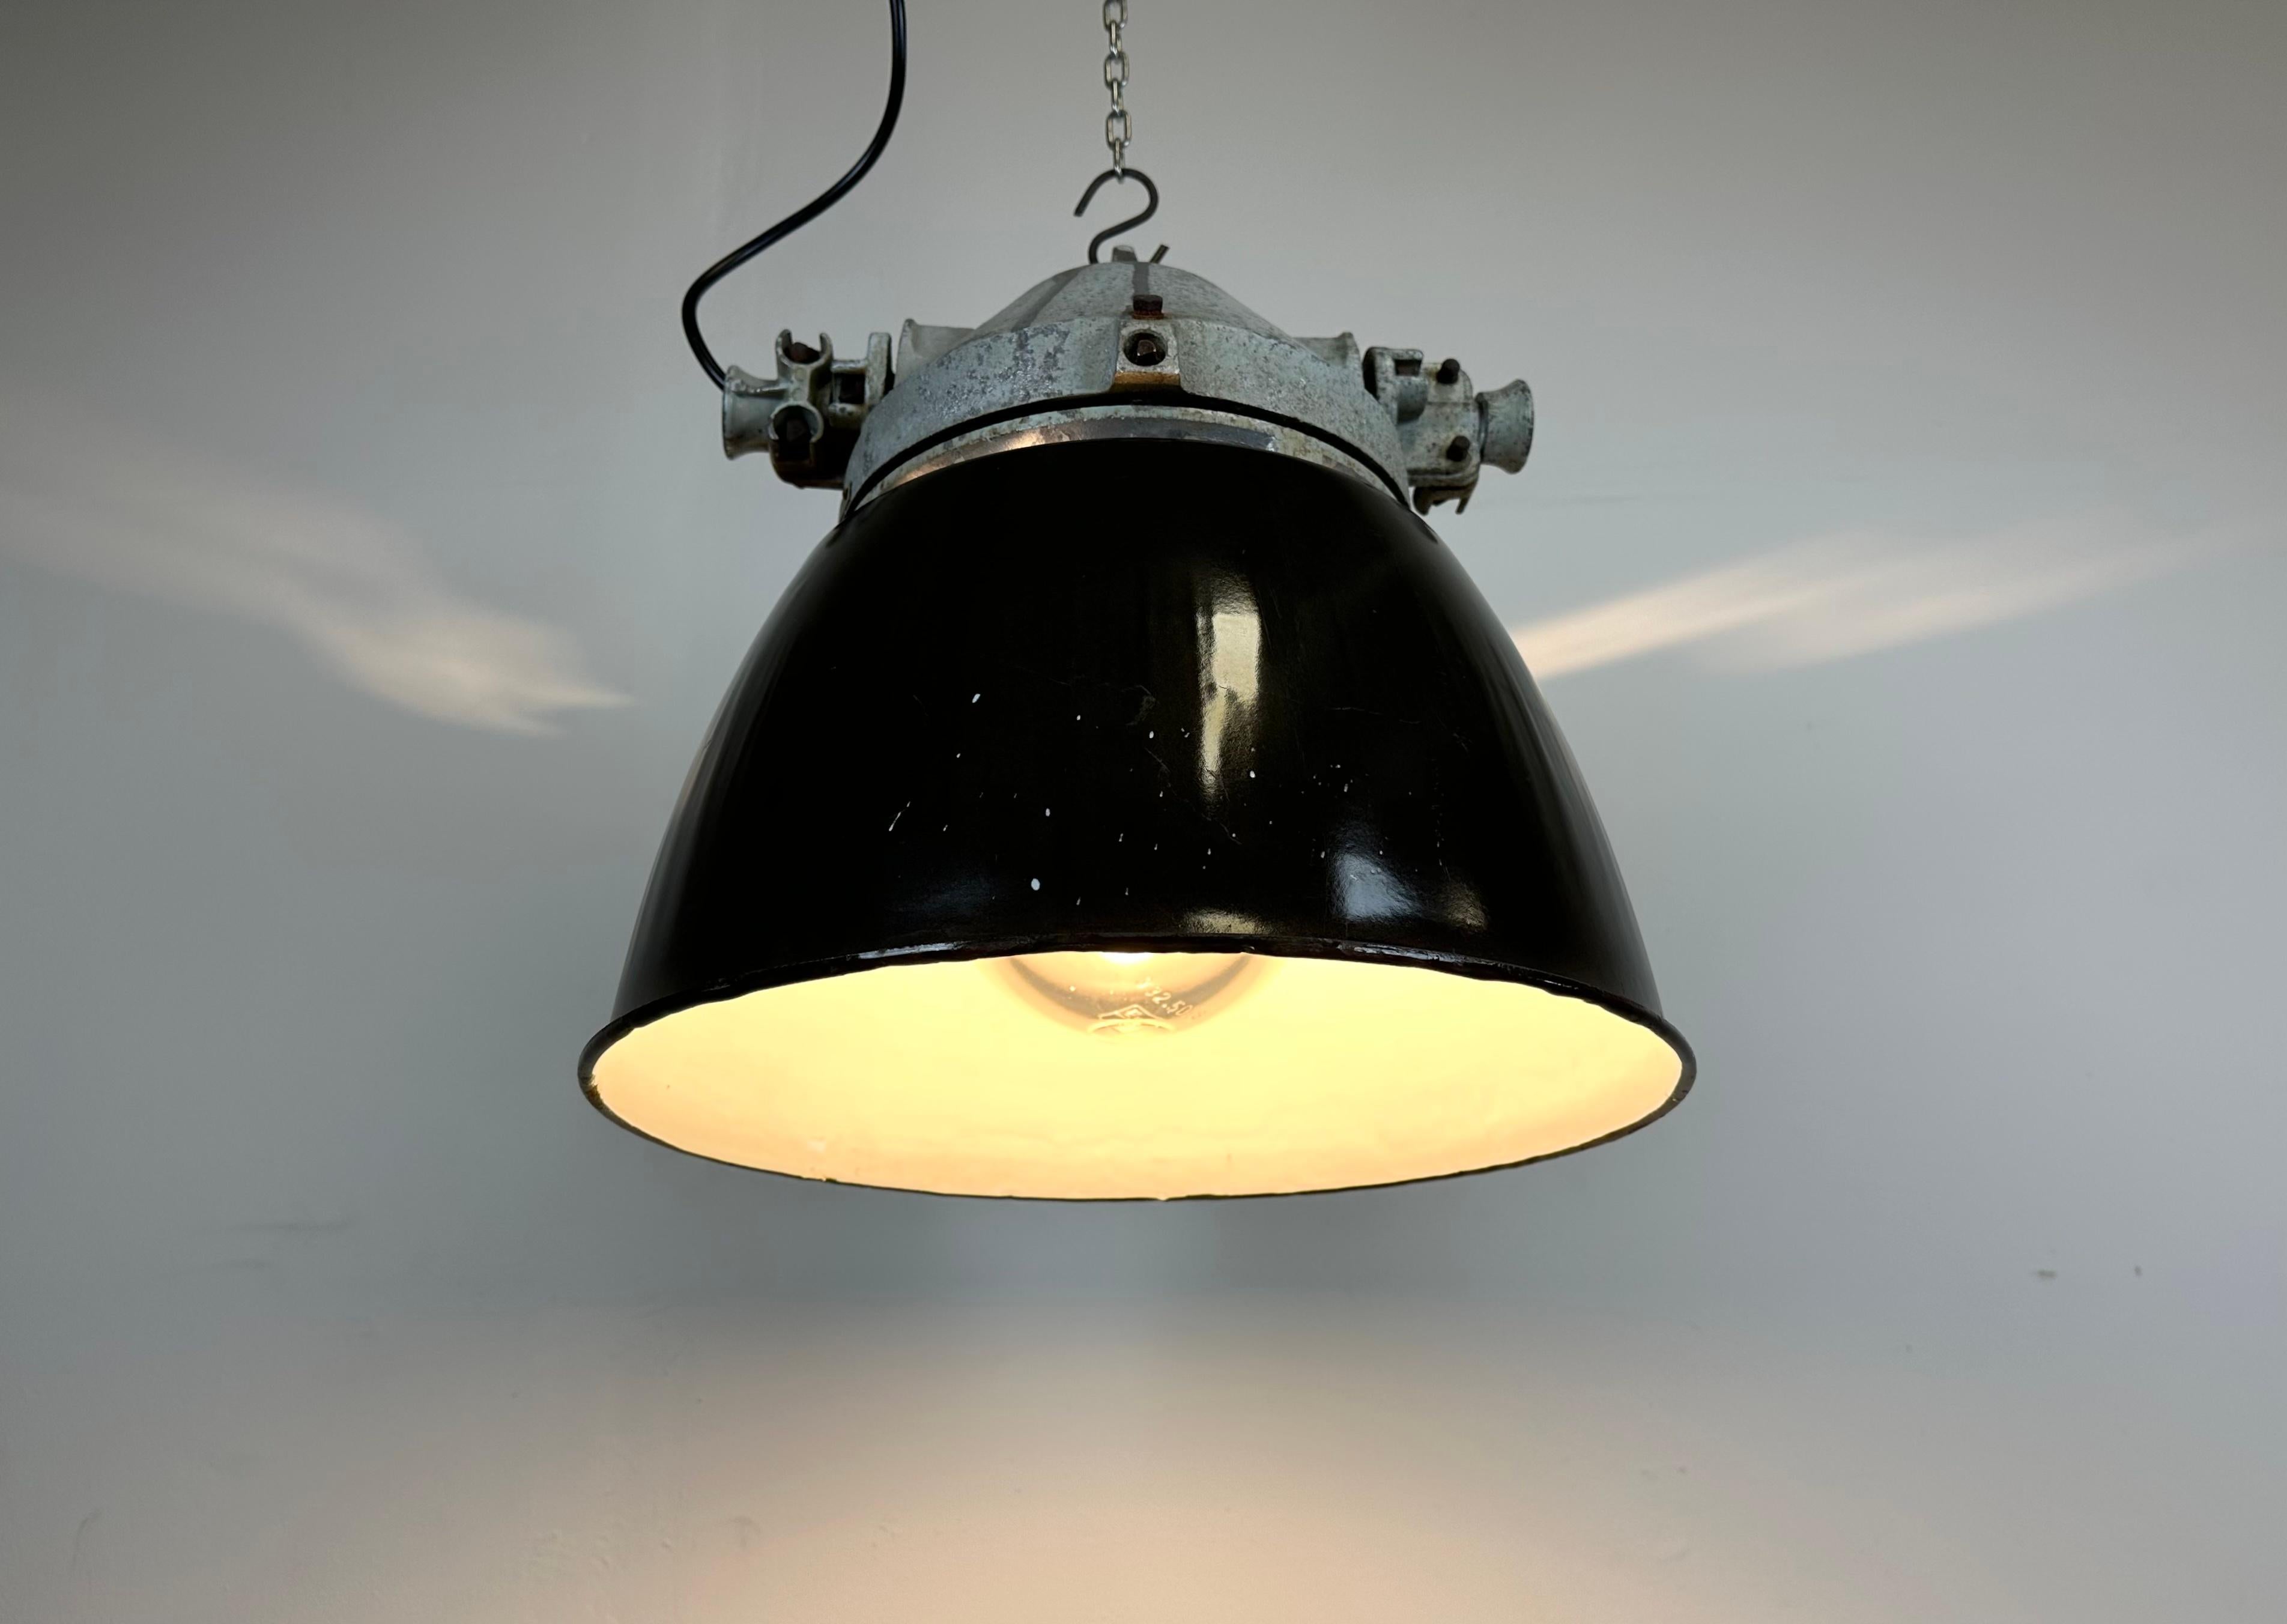 Industrial Grey Explosion Proof Lamp with Black Enameled Shade, 1970s For Sale 9